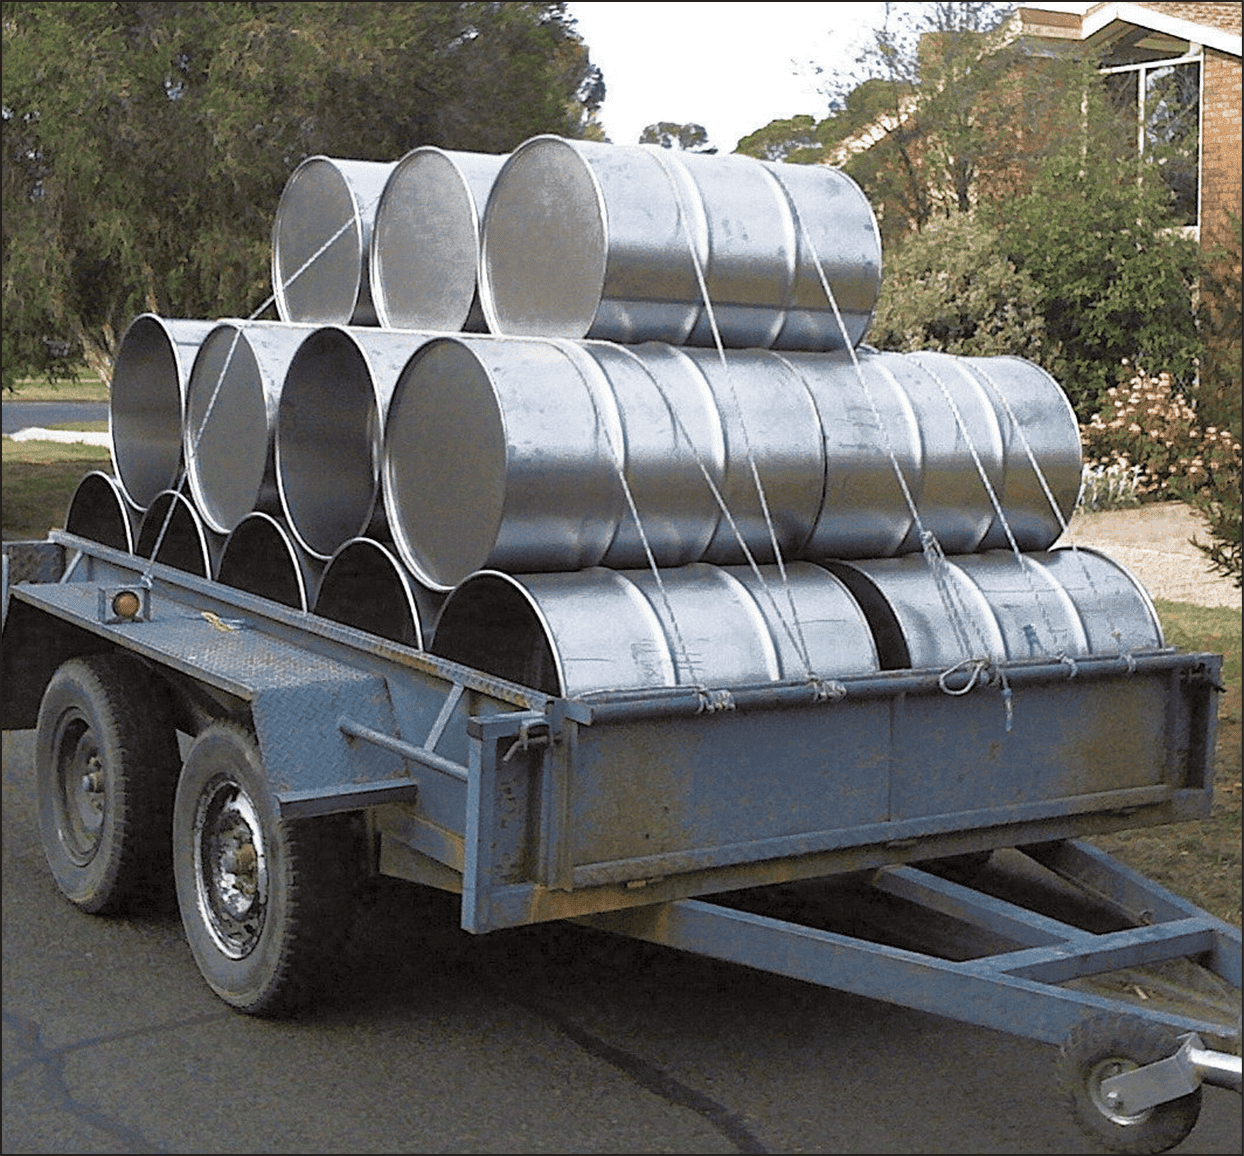 Raw 44-gallon drums in 2009, before their conversion to steelpans.